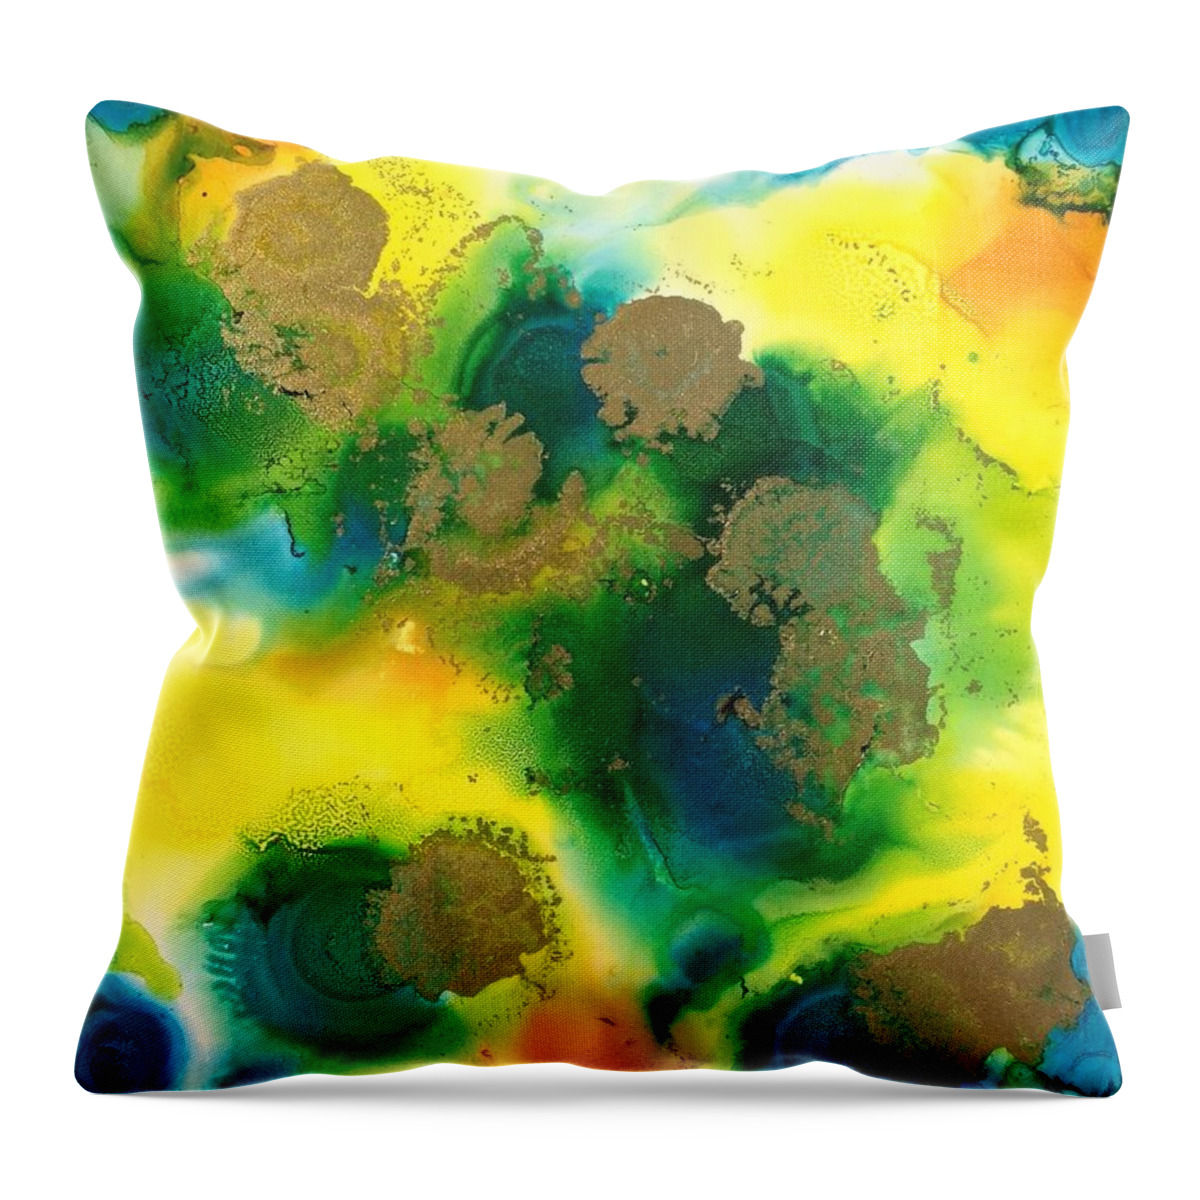 Galactic Throw Pillow featuring the painting Growth Space by Tara Moorman